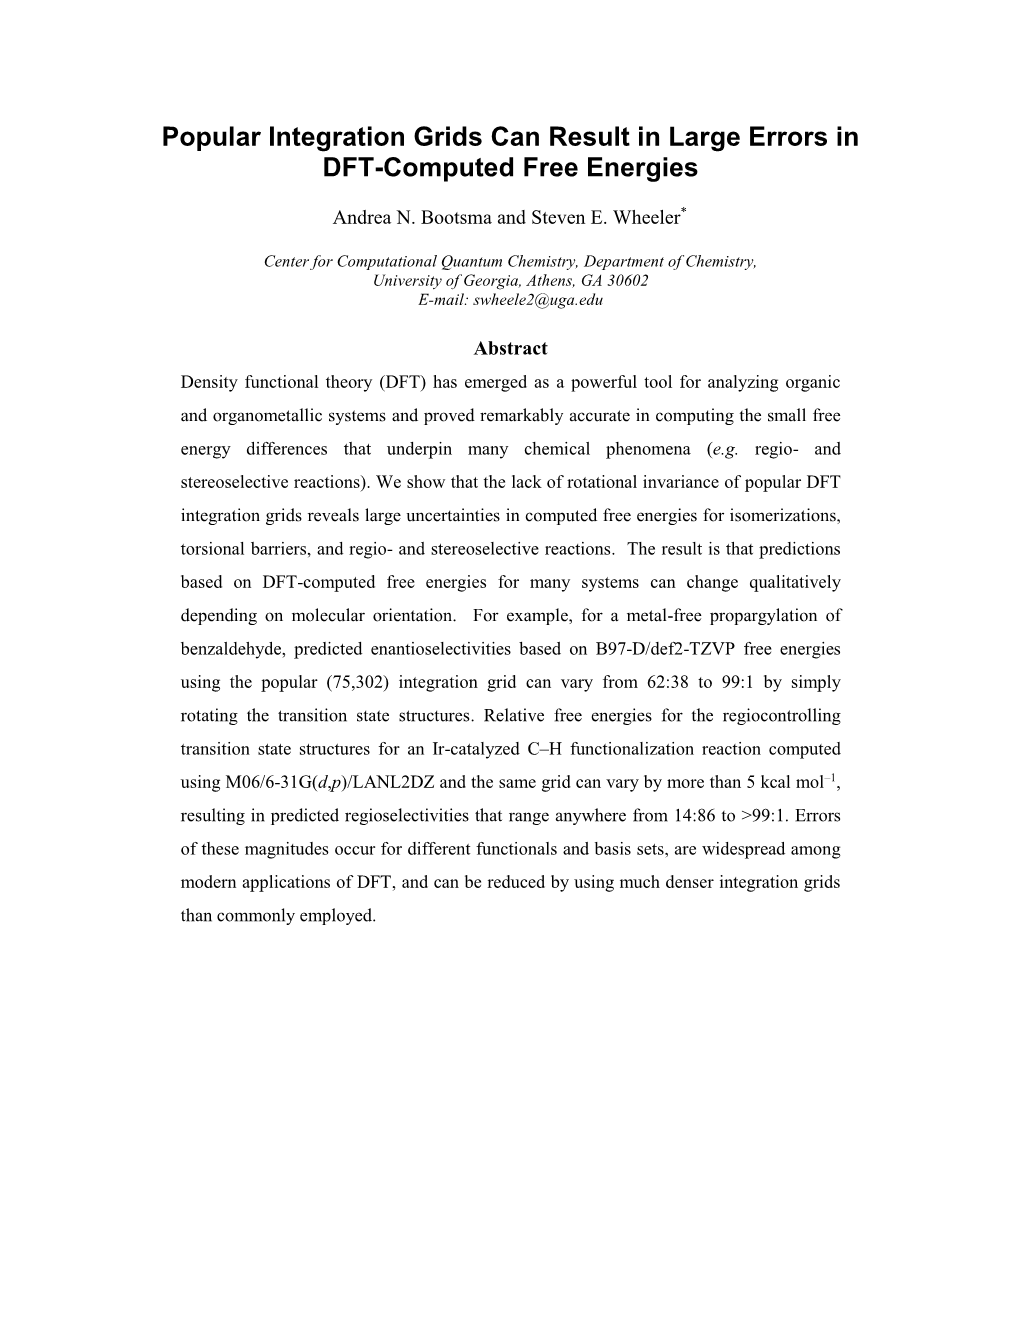 Popular Integration Grids Can Result in Large Errors in DFT-Computed Free Energies